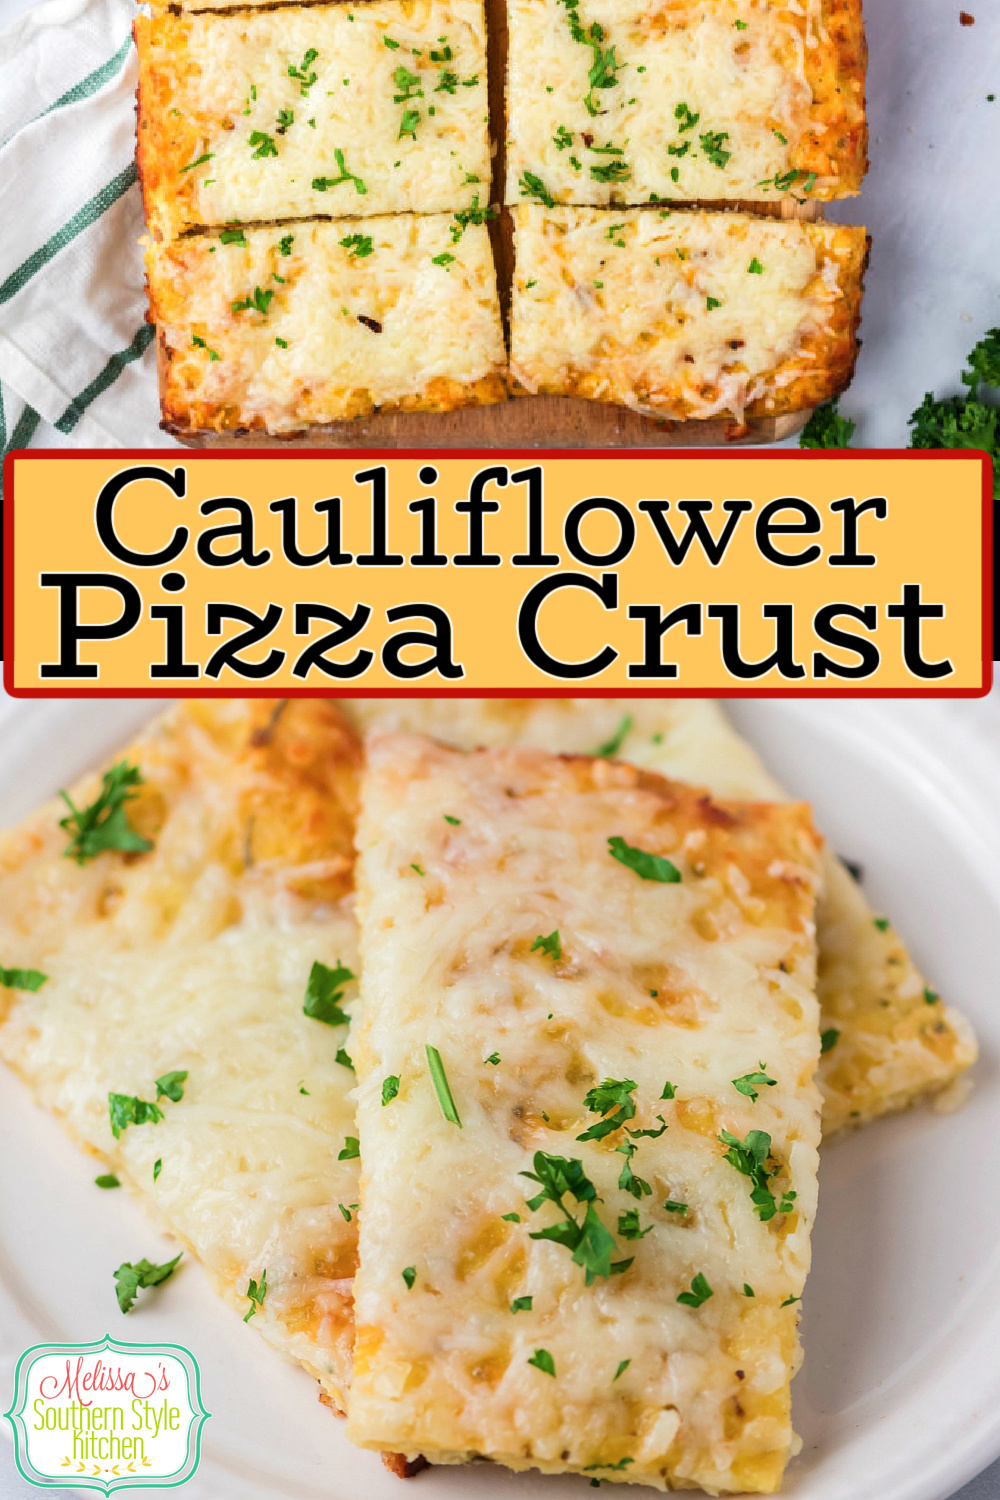 Ditch the guilt and enjoy this Cheesy Cauliflower Pizza Crust for dinner #cauliflowercrust #cauliflower #lowcarb #ketopizzacrust #keto #cheesypizza #pizzarecipes #southernfood #southernrecipes #melissassouthernstylekitchen via @melissasssk